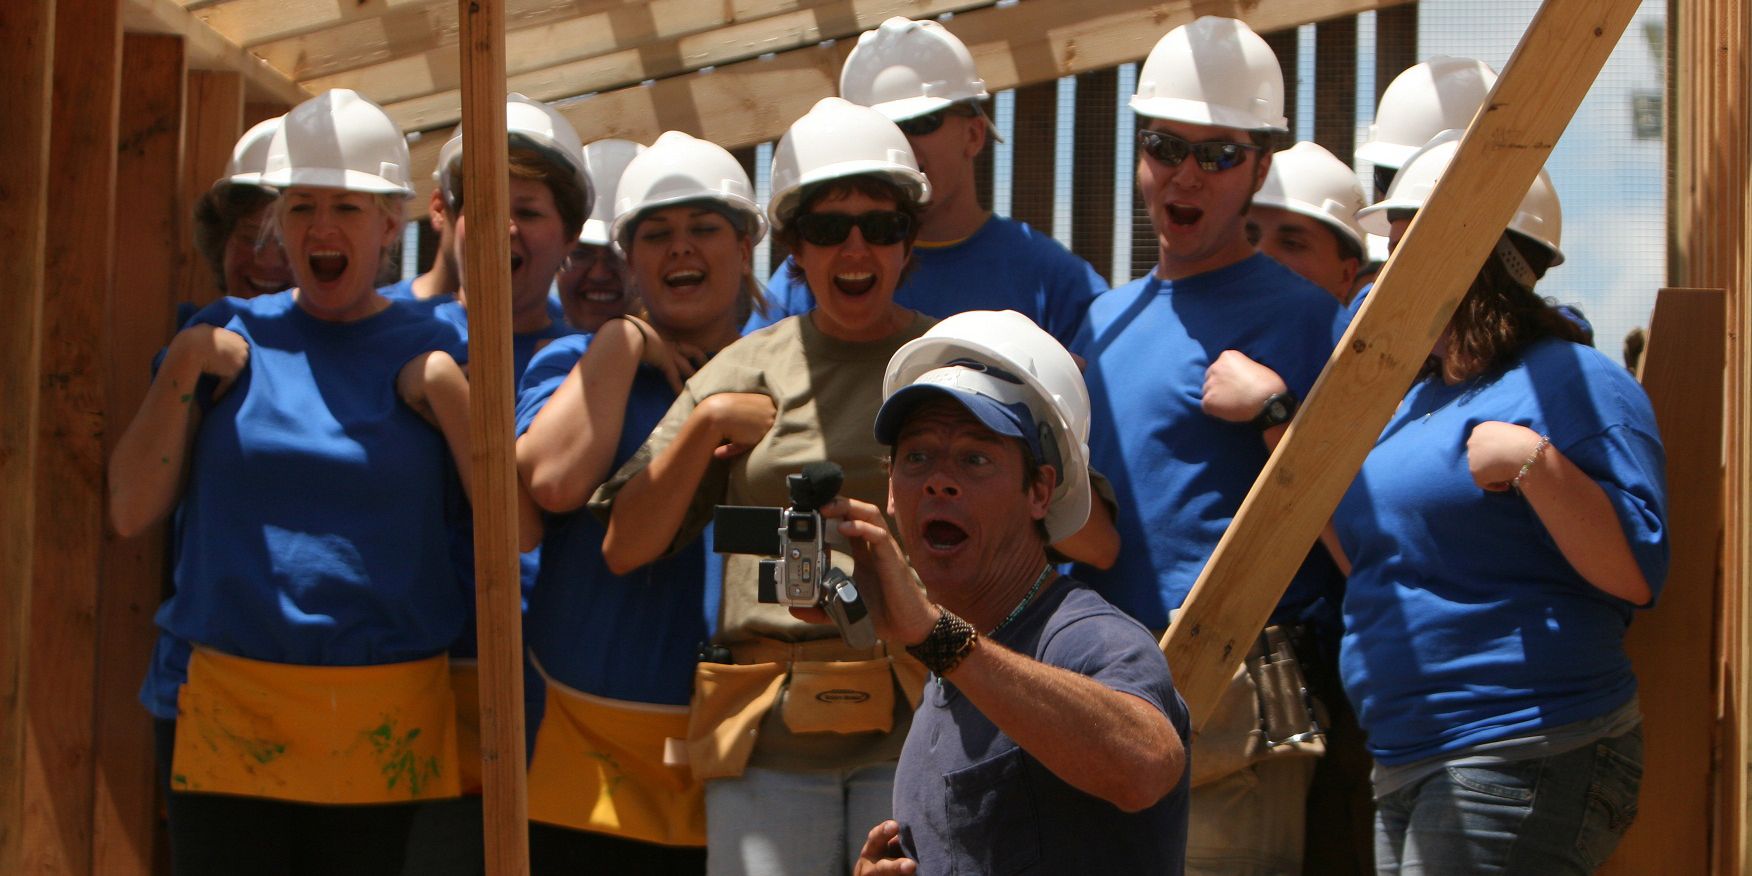 15 Secrets From Extreme Makeover Home Edition You Had No Idea About